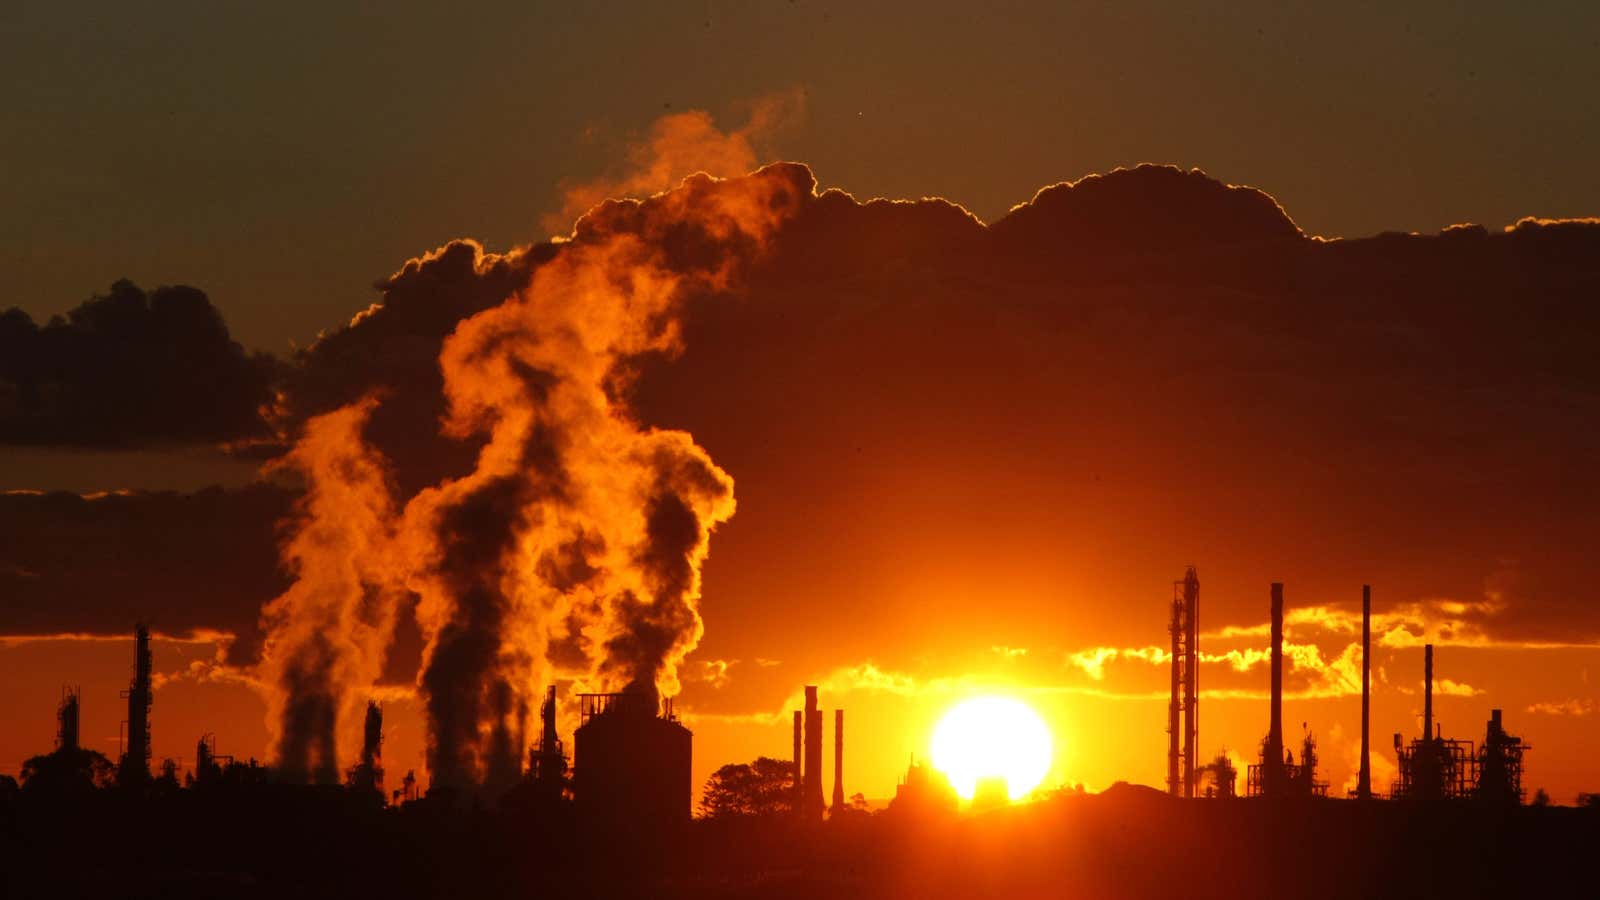 The sun is setting on lacklustre corporate emissions goals.